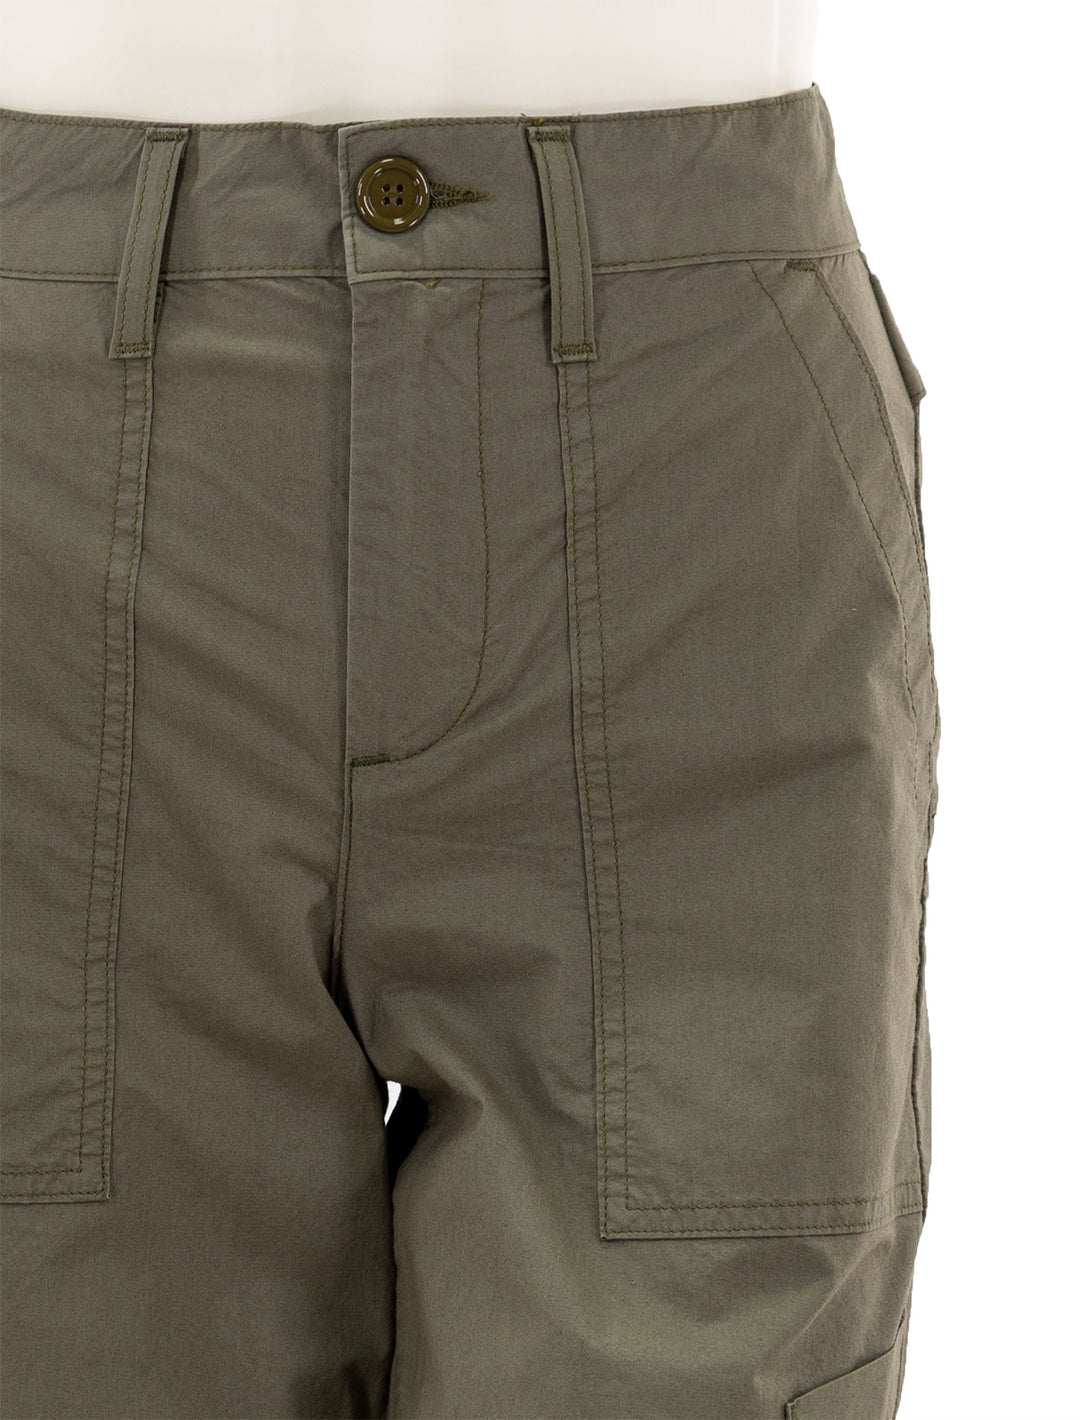 Close-up view of AGOLDE's daria utility pant in duffle.